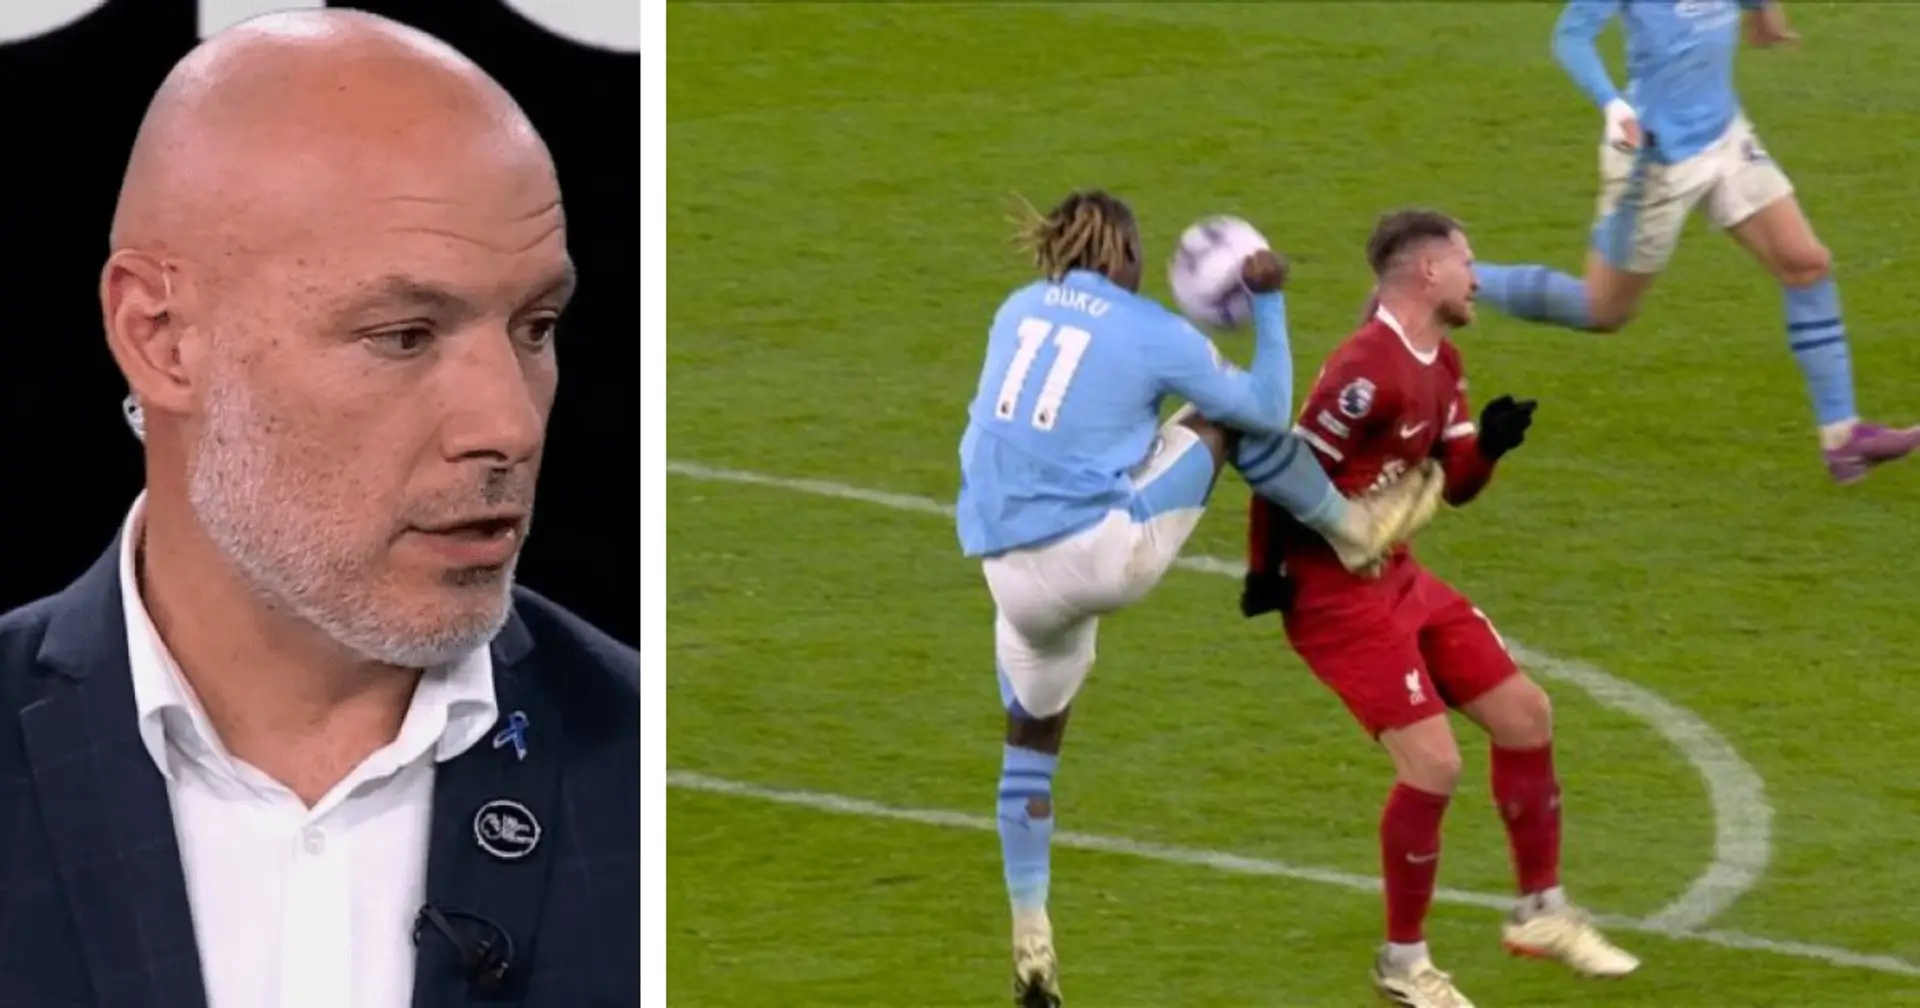 'The ball is too low to head': Howard Webb defends referee decision not to award penalty for Doku karate kick